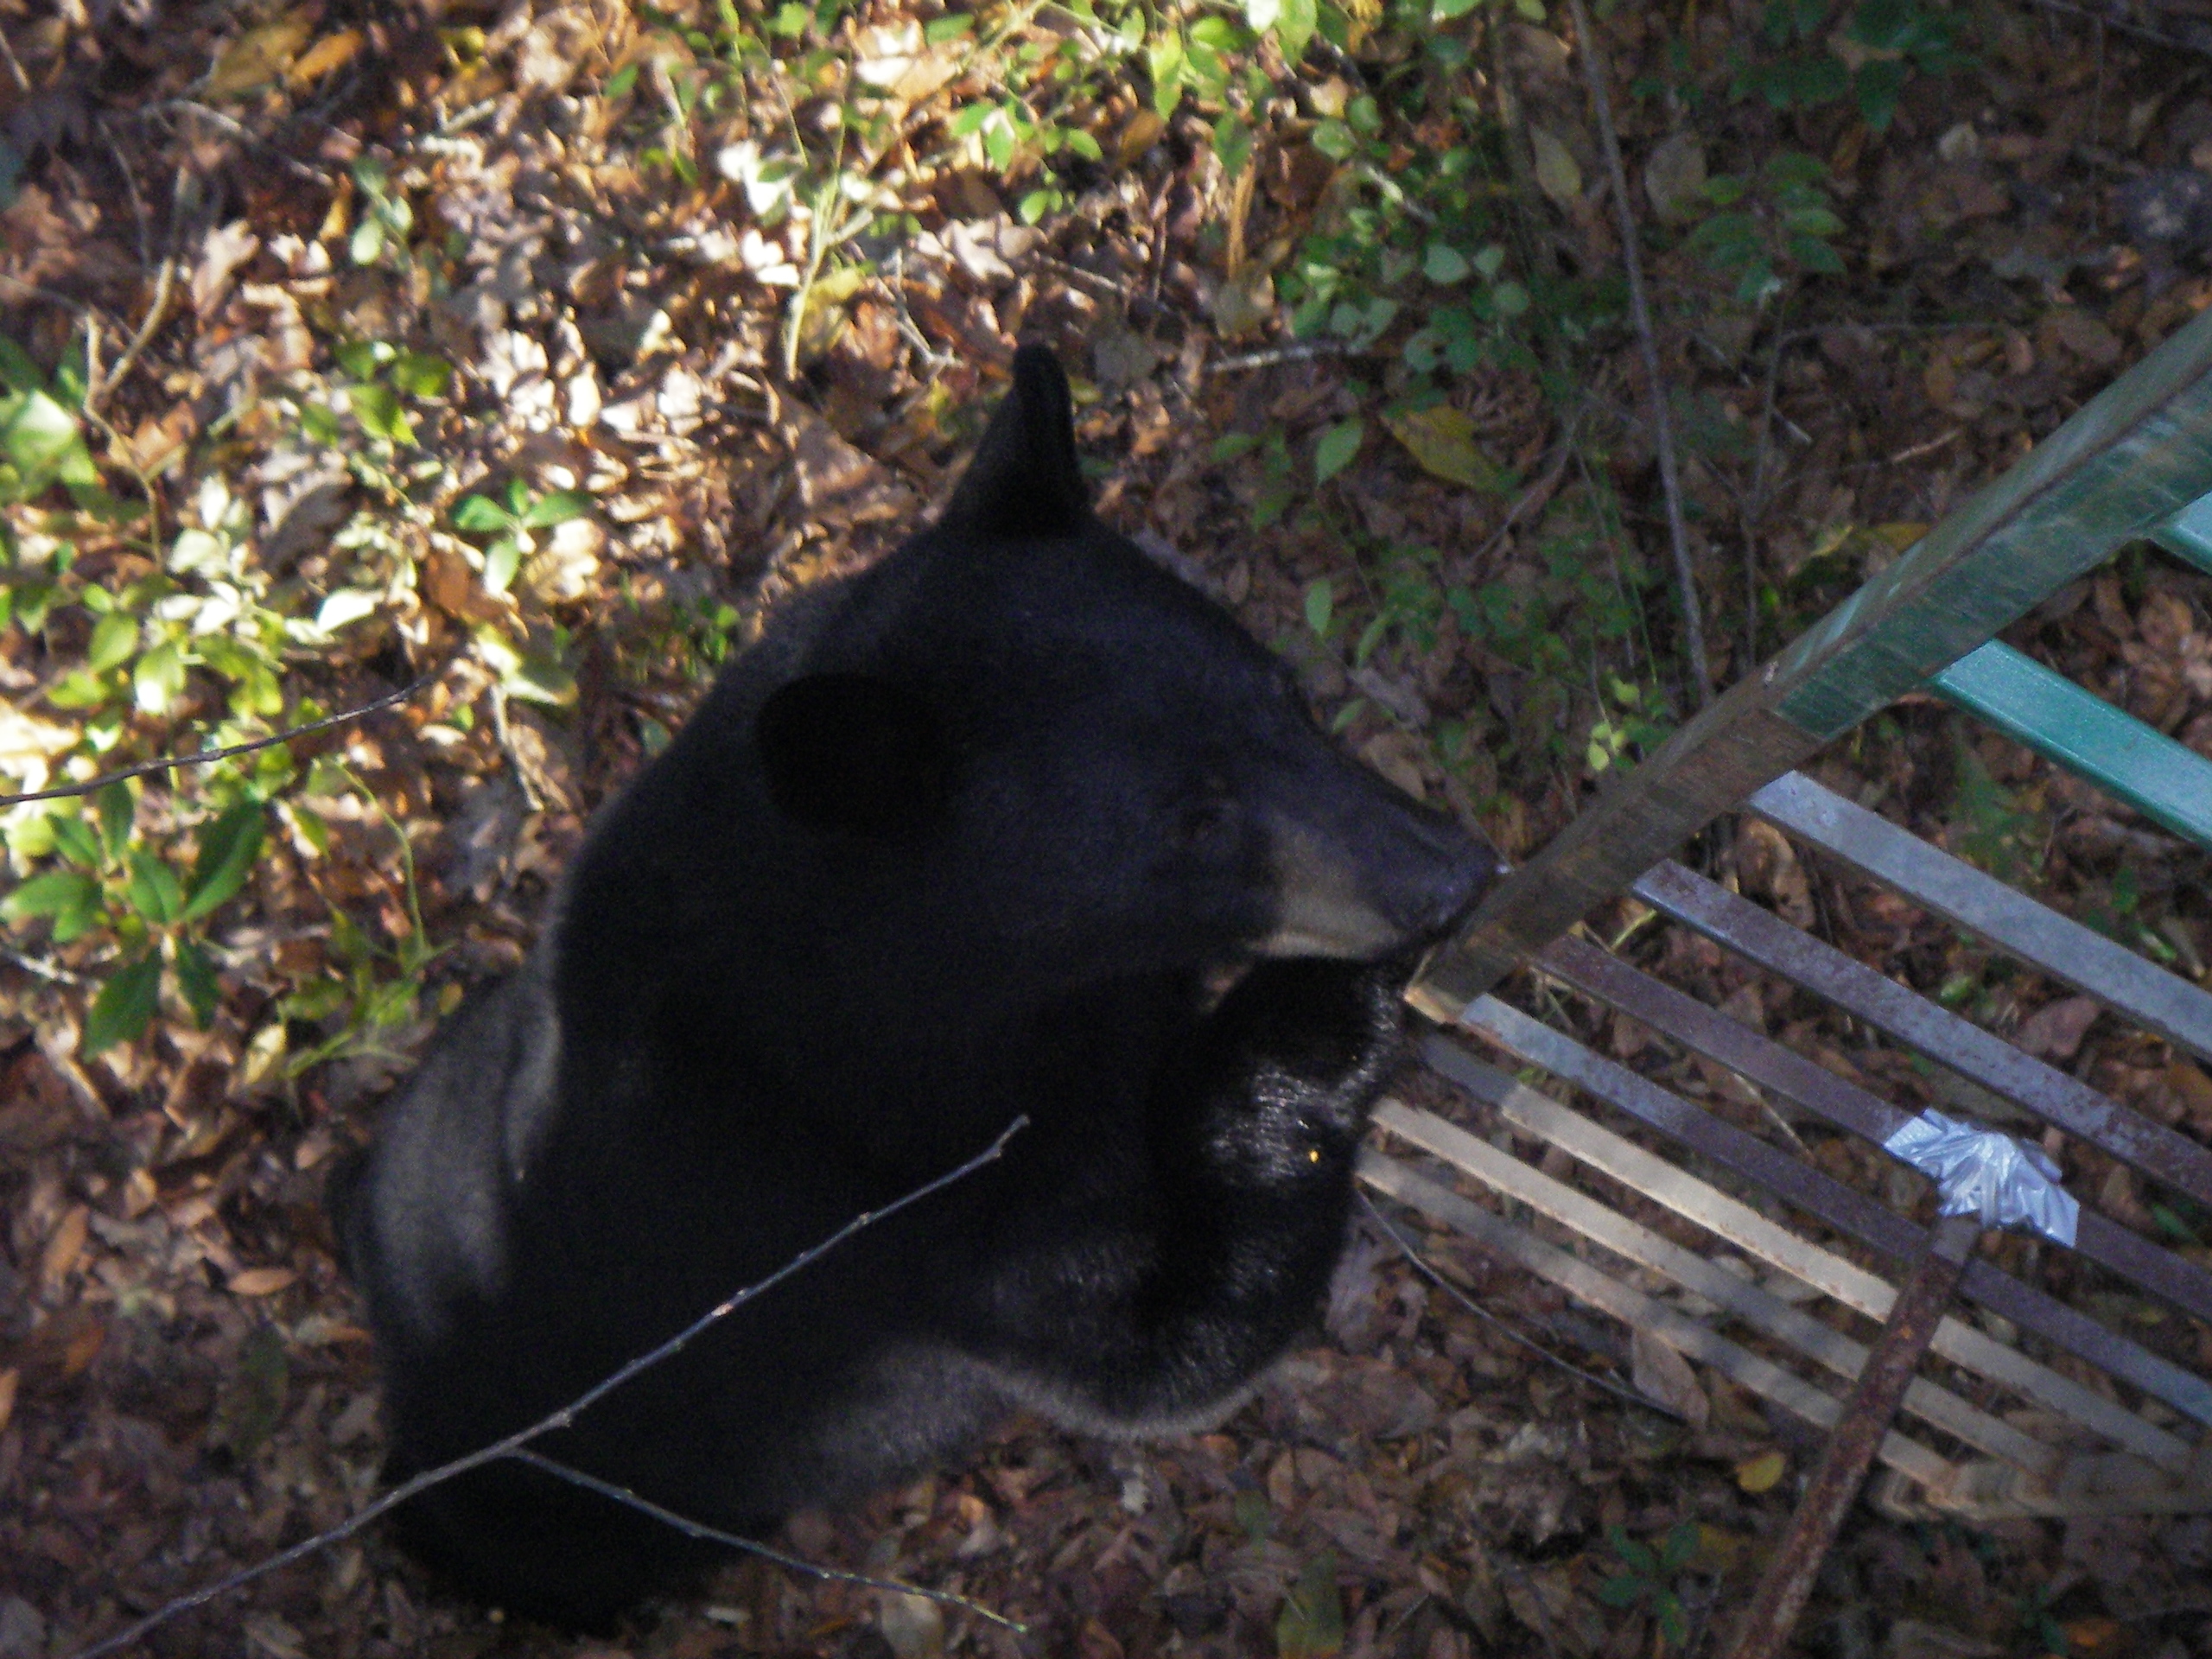 Black bear looking over wire fence